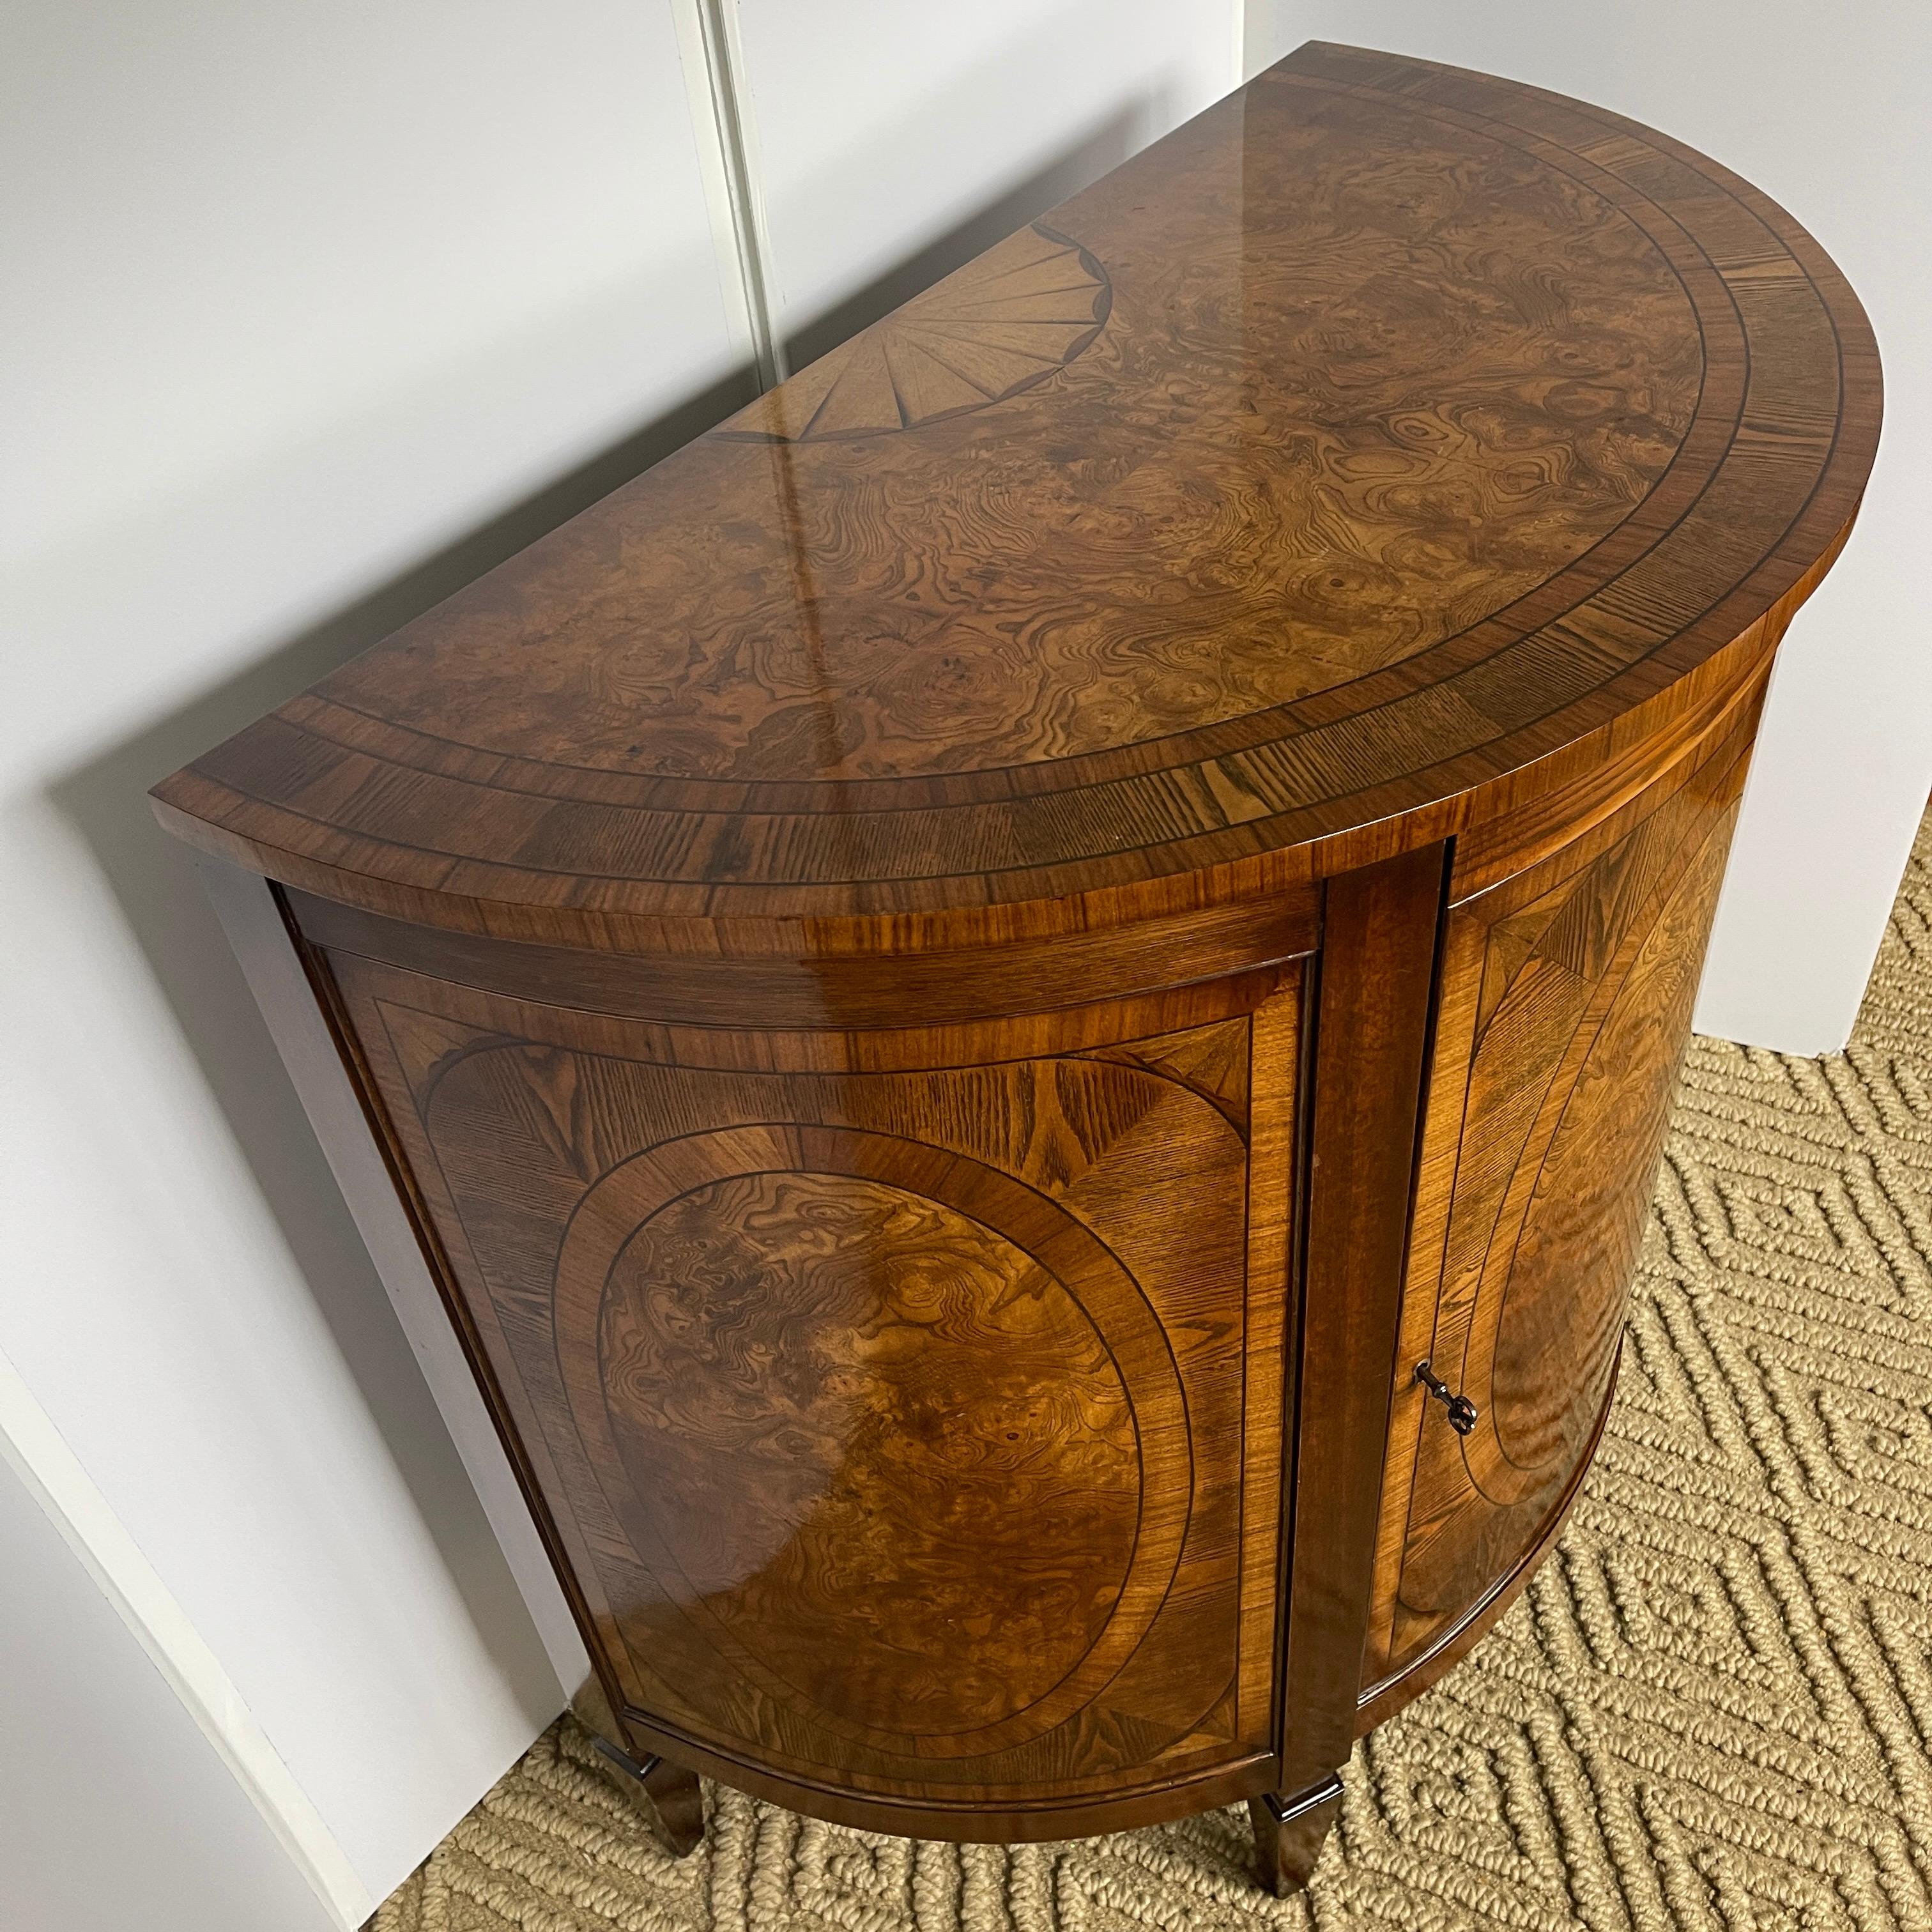 Demi-lune mahogany and yew wood demi-lune dresser cabinet.
Made in England, this beautiful wood dresser or cabinet is as comfortable in a bedroom as it is in a foyer or living room. The wood glows; it's classical shape will lend itself to any decor